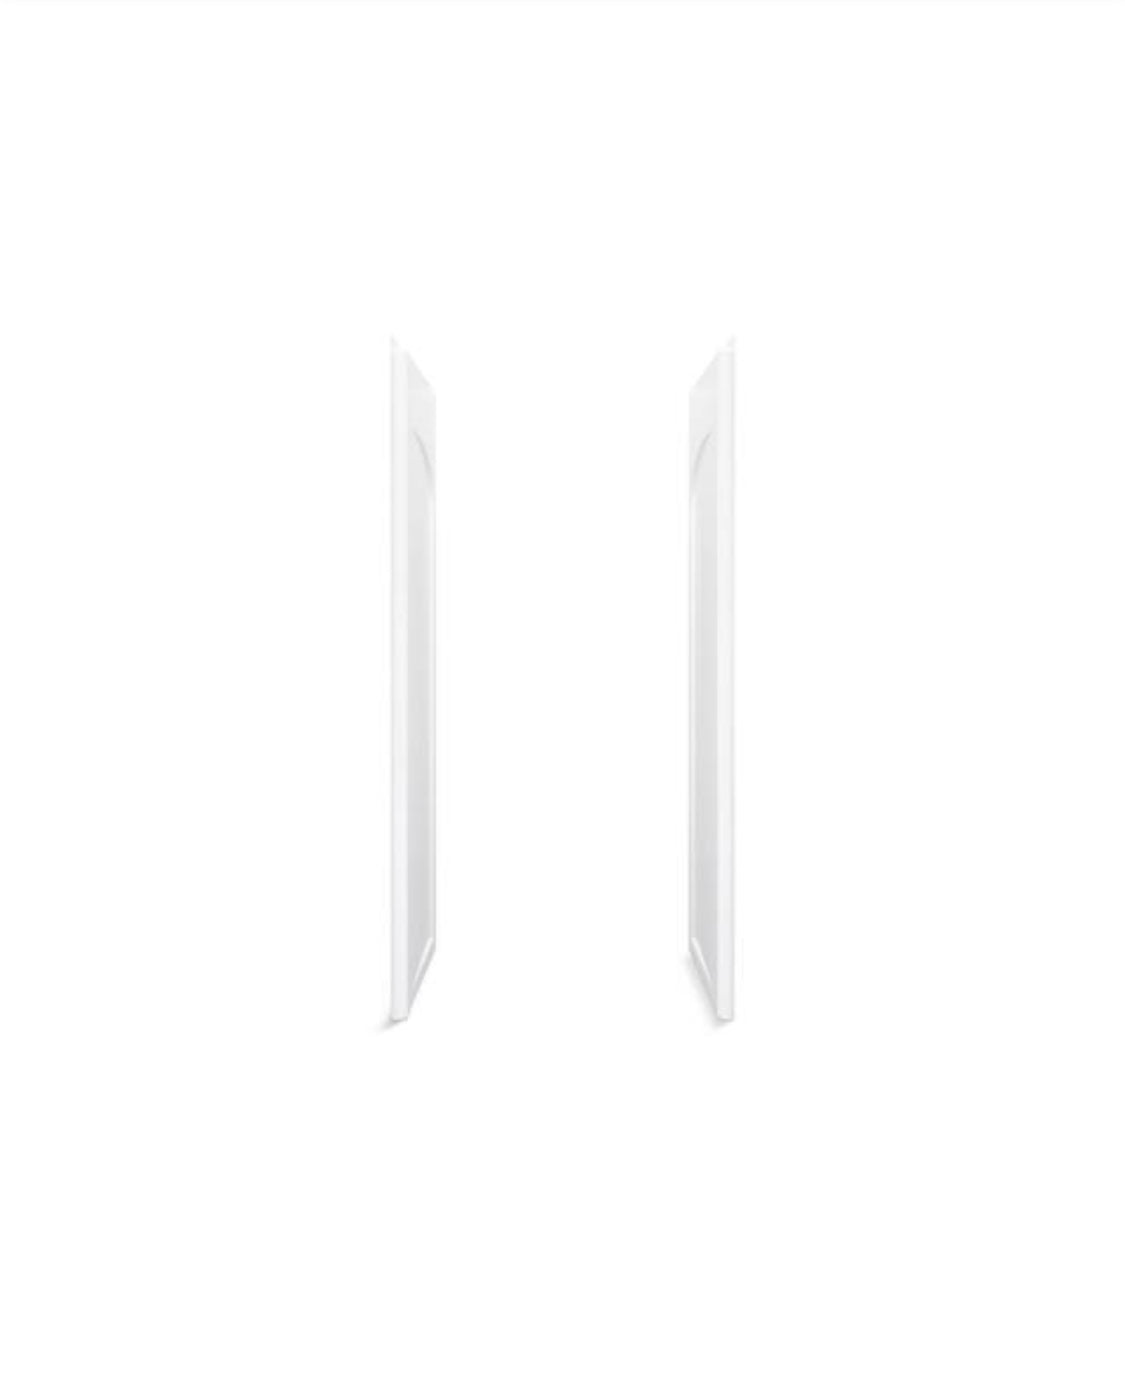 Ensemble 1-1/4 in. x 34 in. x 72-1/2 in. 2-piece Direct-to-Stud Shower End Wall Set in White- Sterling